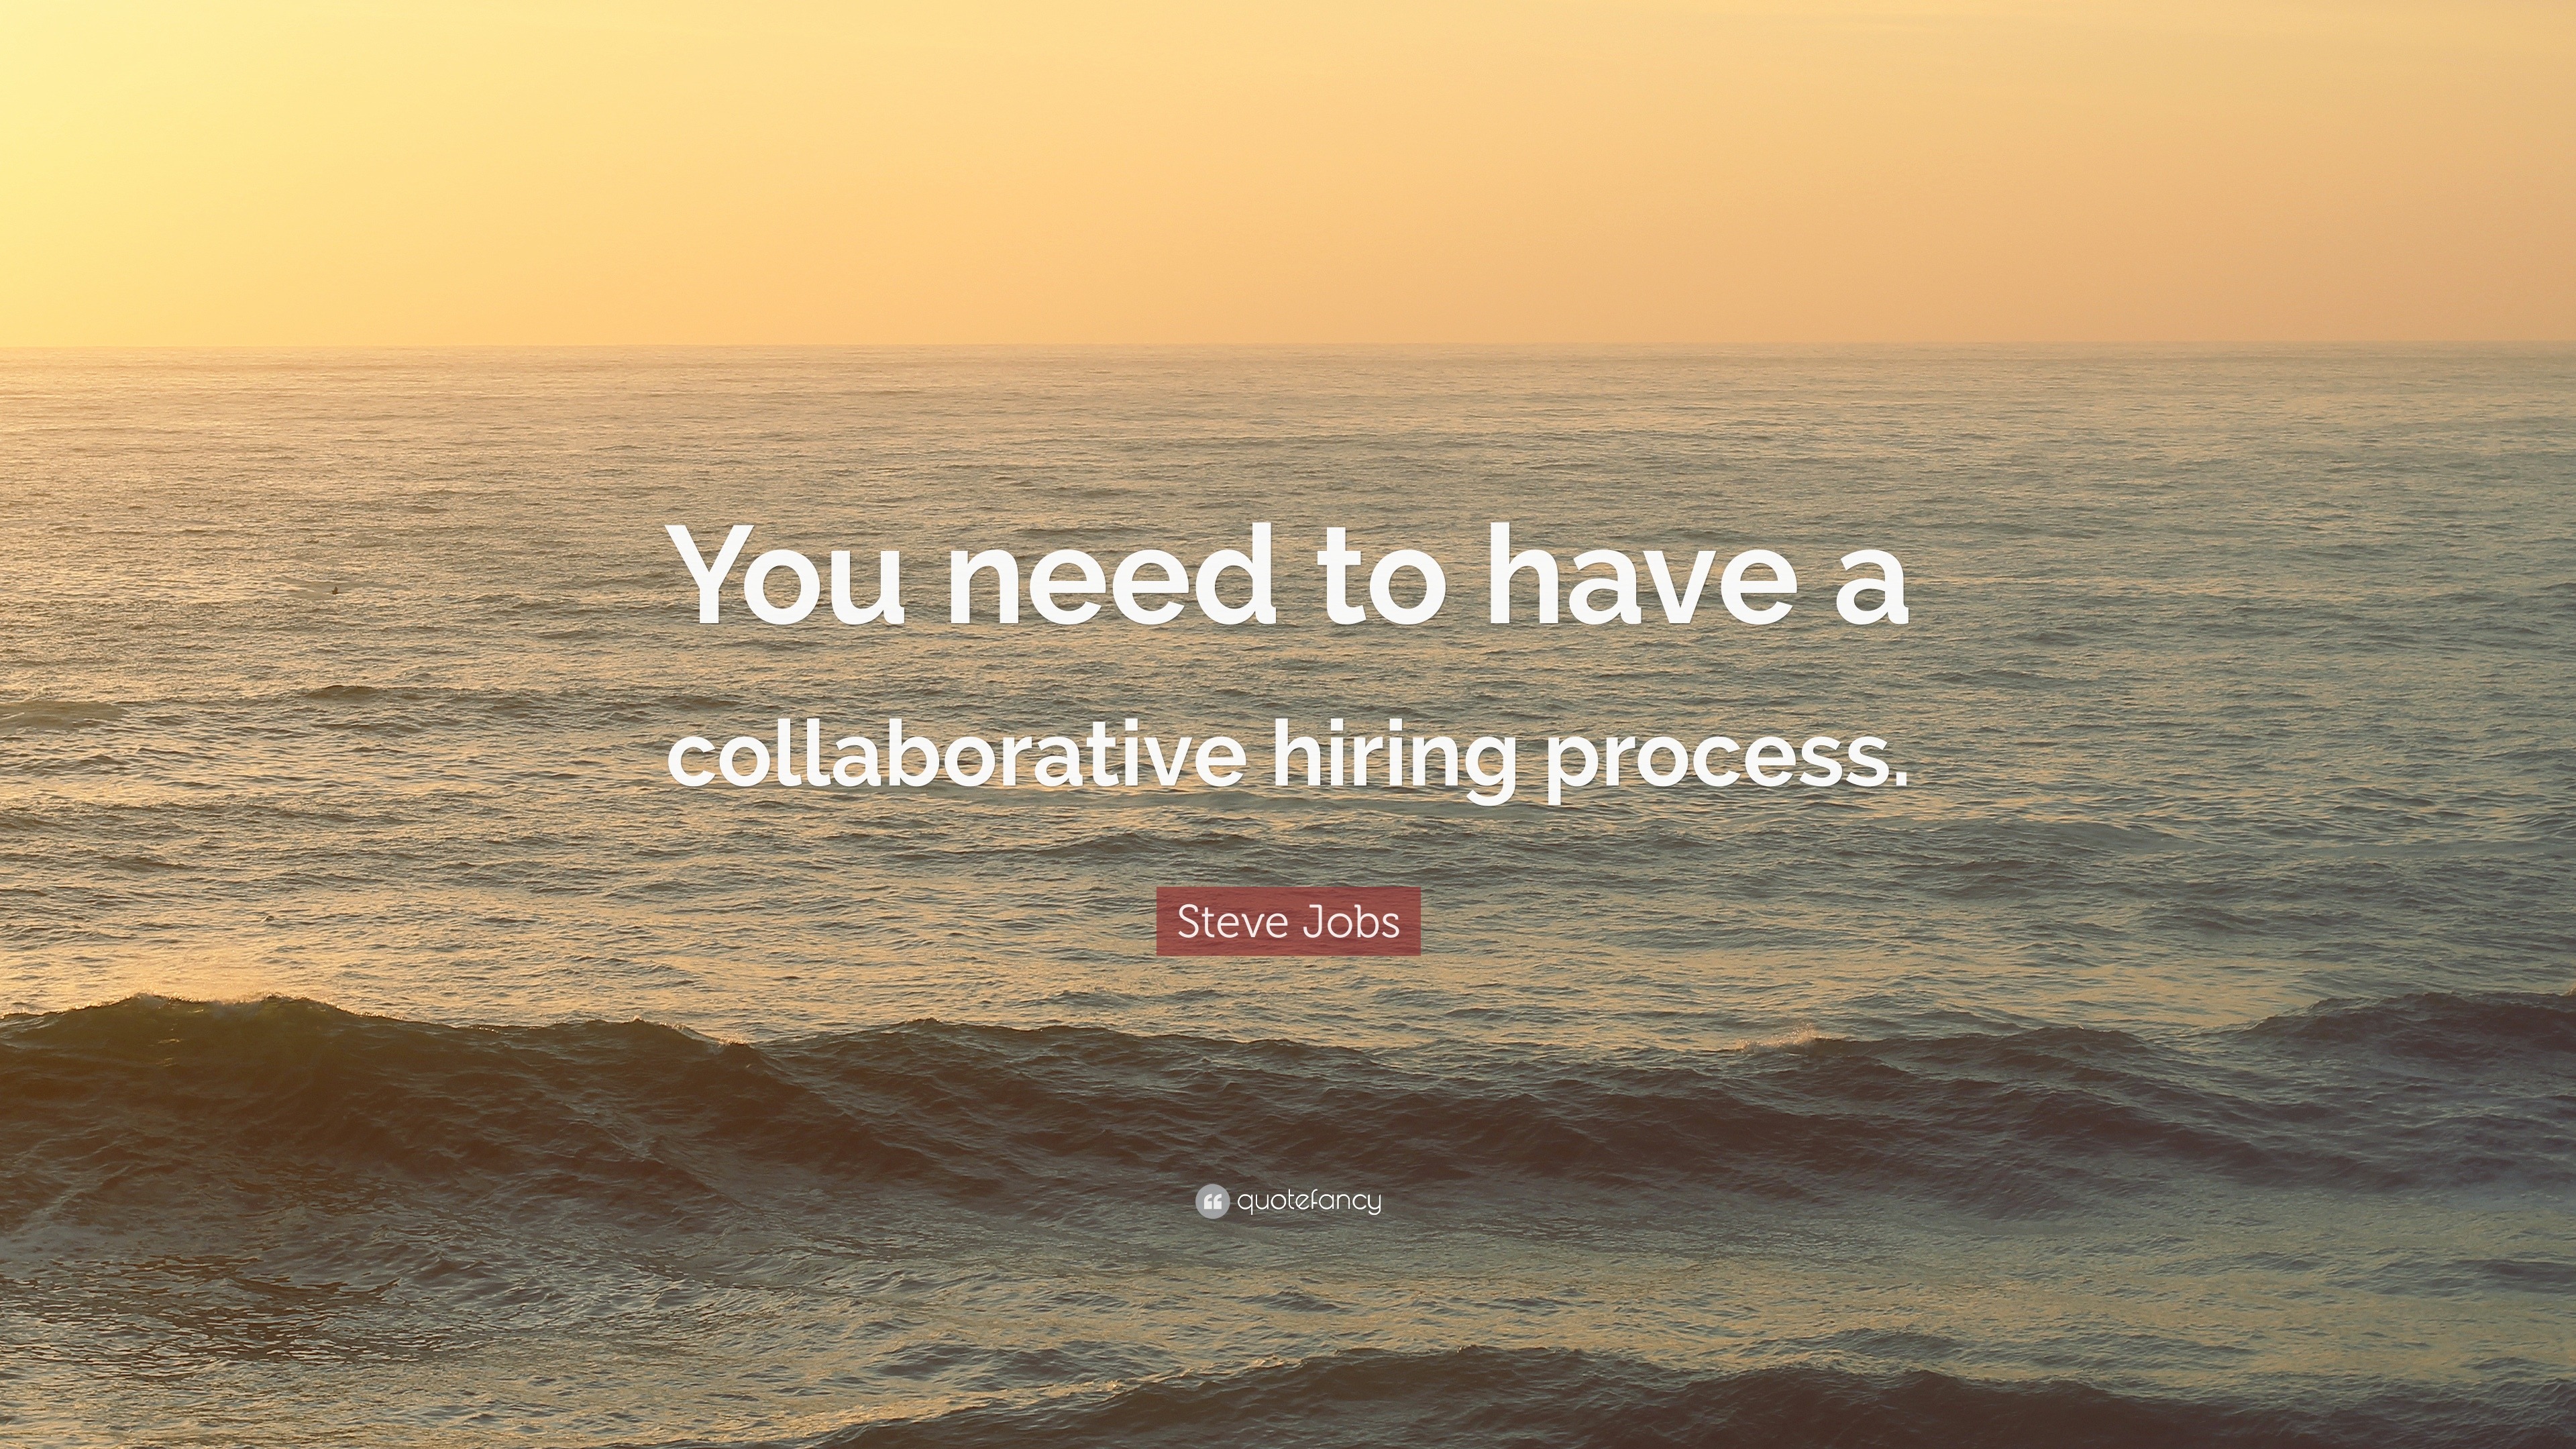 Steve Jobs Quote: "You need to have a collaborative hiring ...